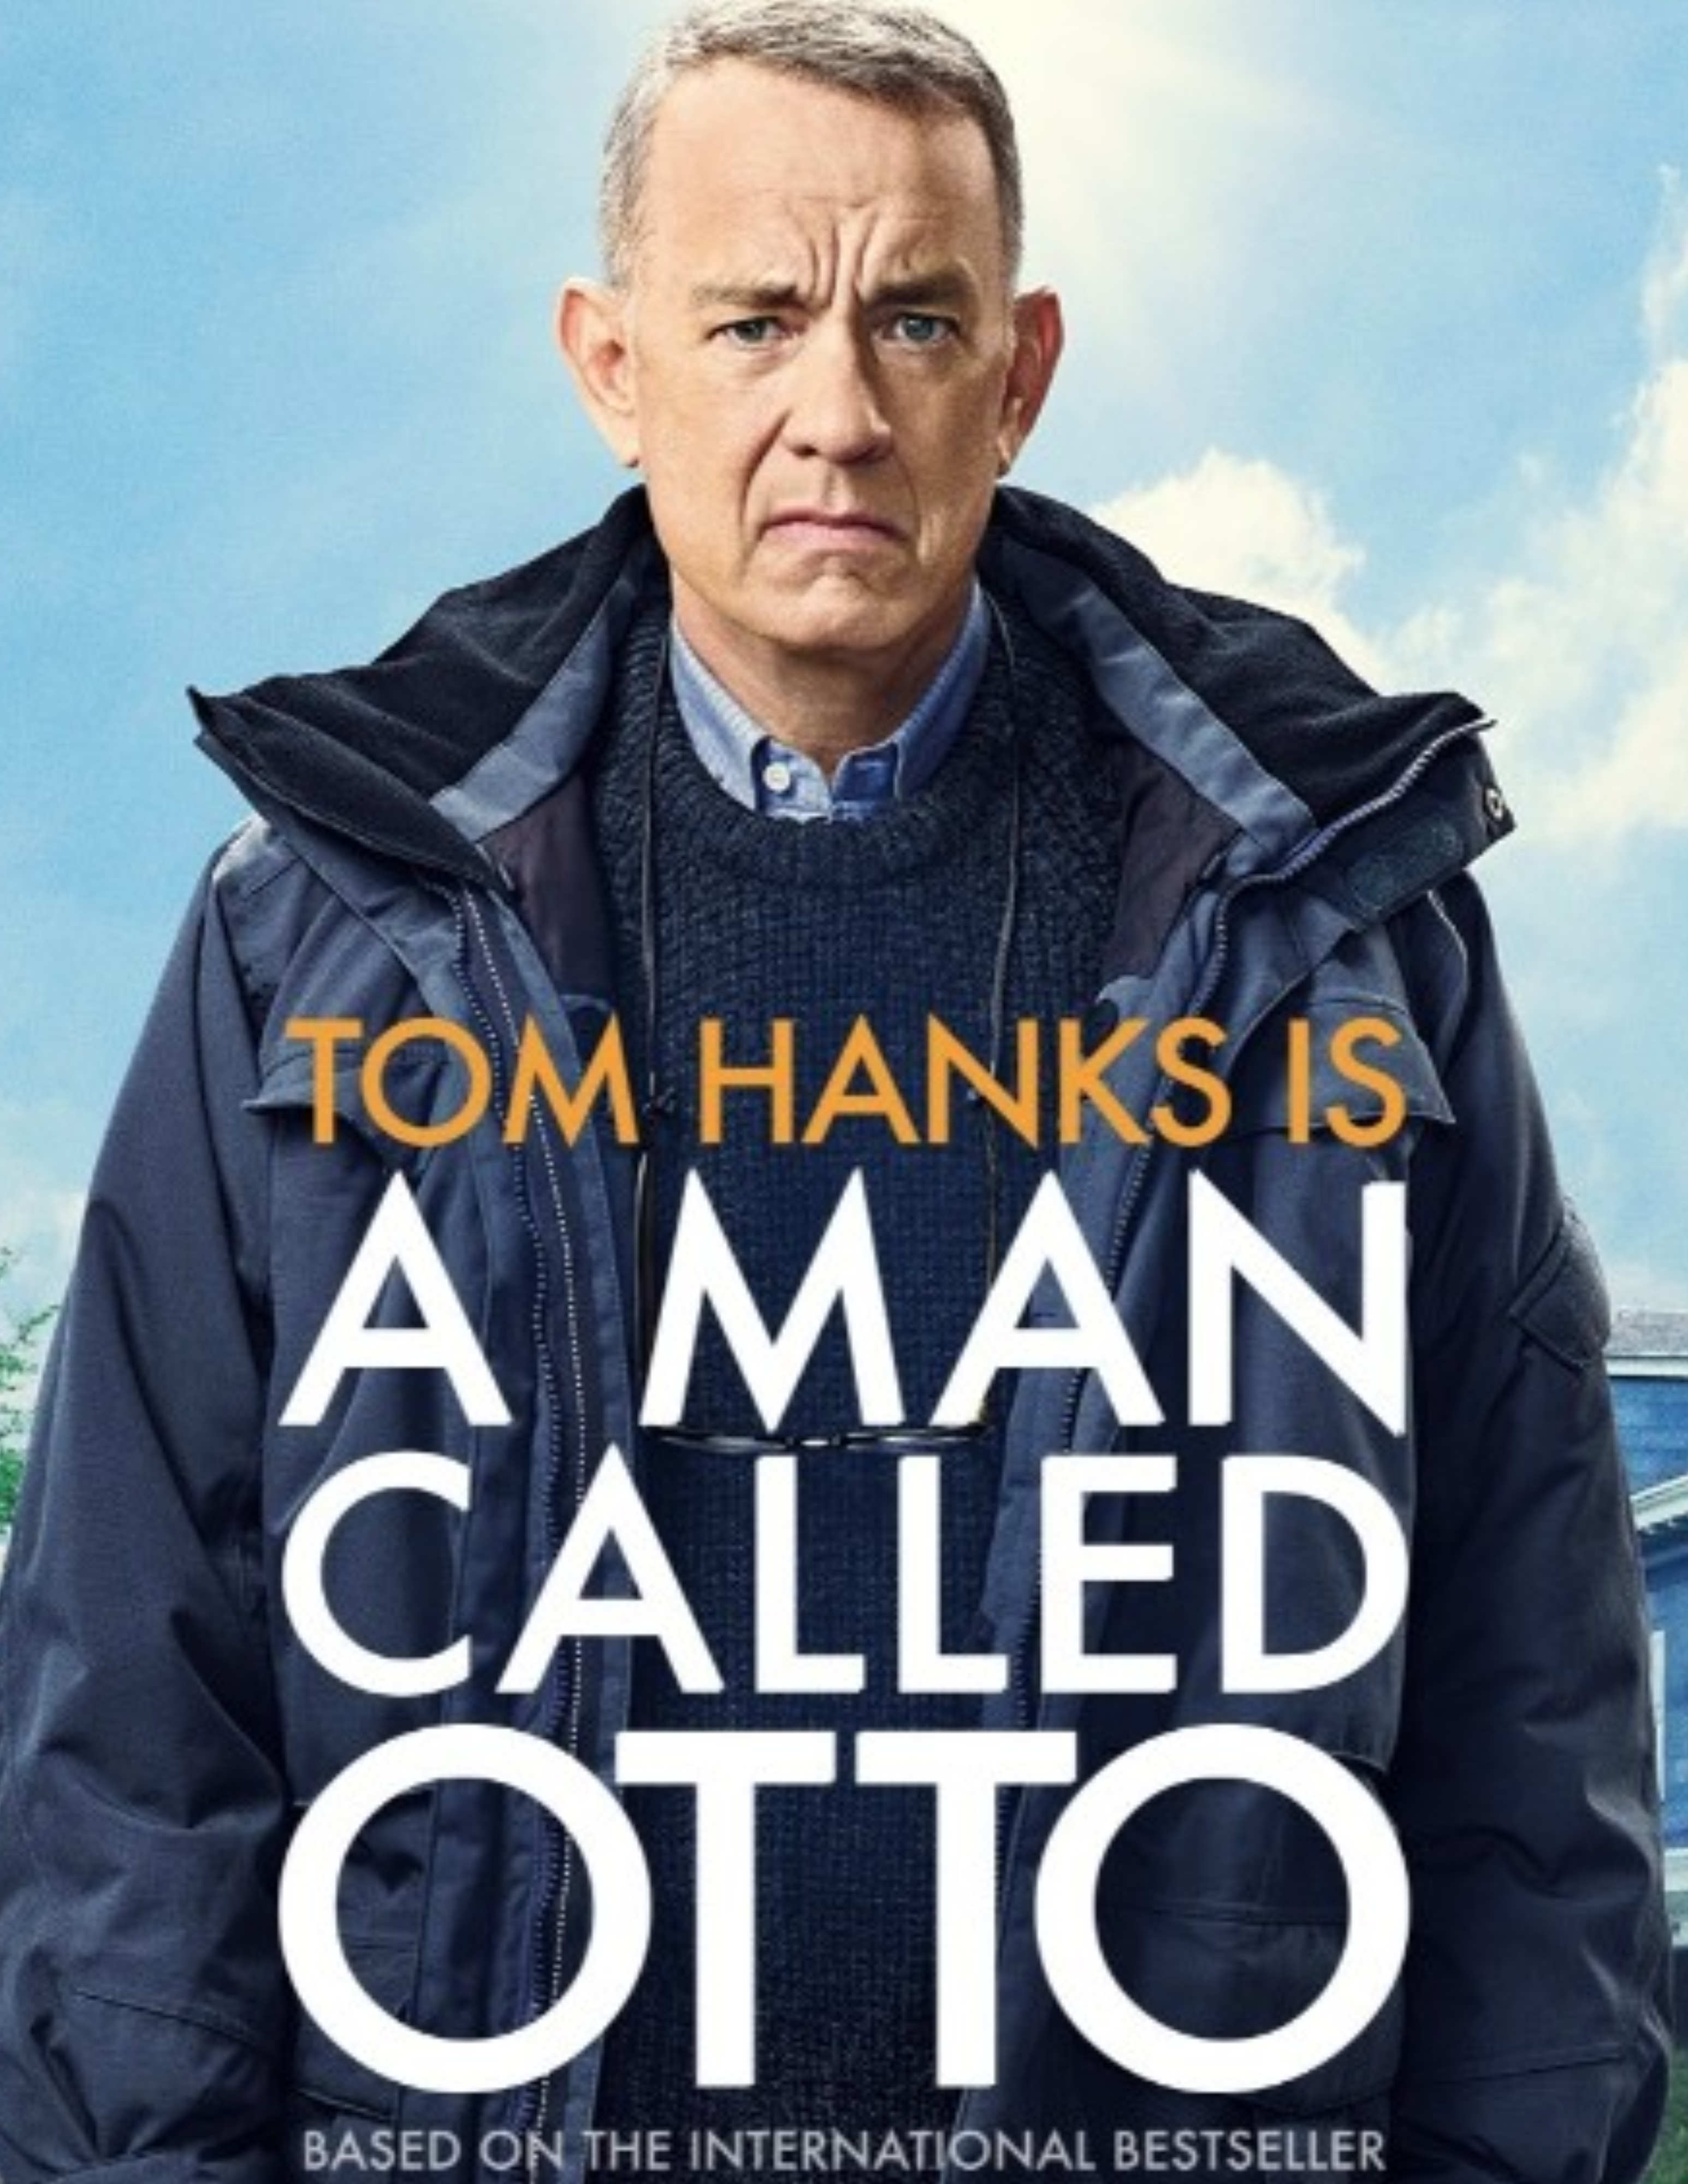 Tom Hanks is A Man Called Otto